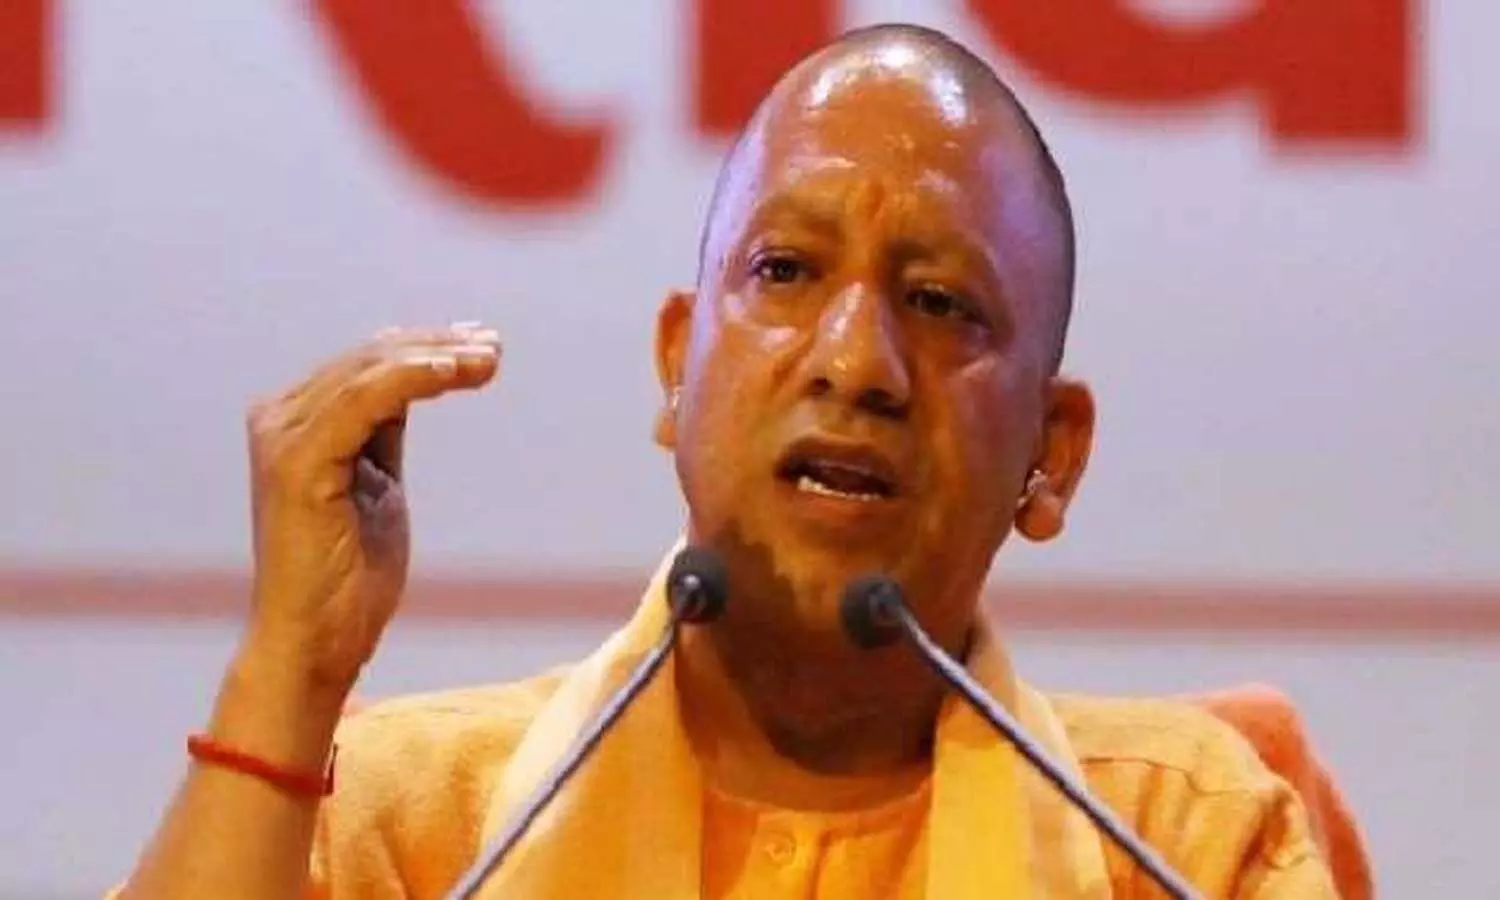 Chief Minister Yogi Adityanath said that there should be excellent coordination between village heads, district panchayat members, area panchayat members